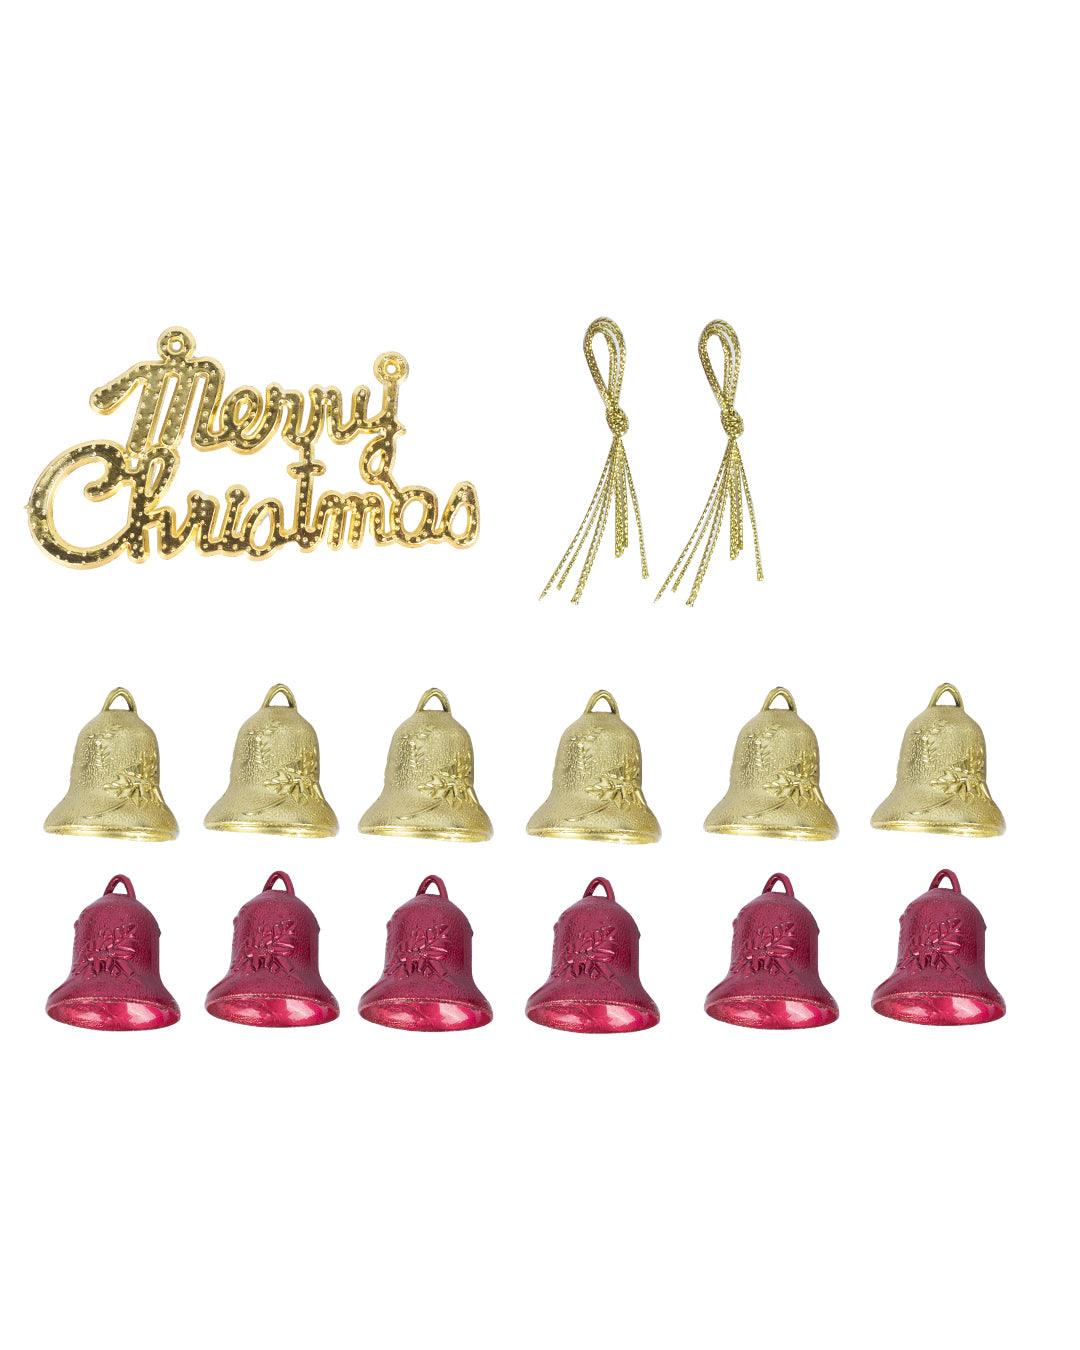 Christmas Tree Decorations Accessories (Pack Of 37 Piece, Assorted Colour) - MARKET 99